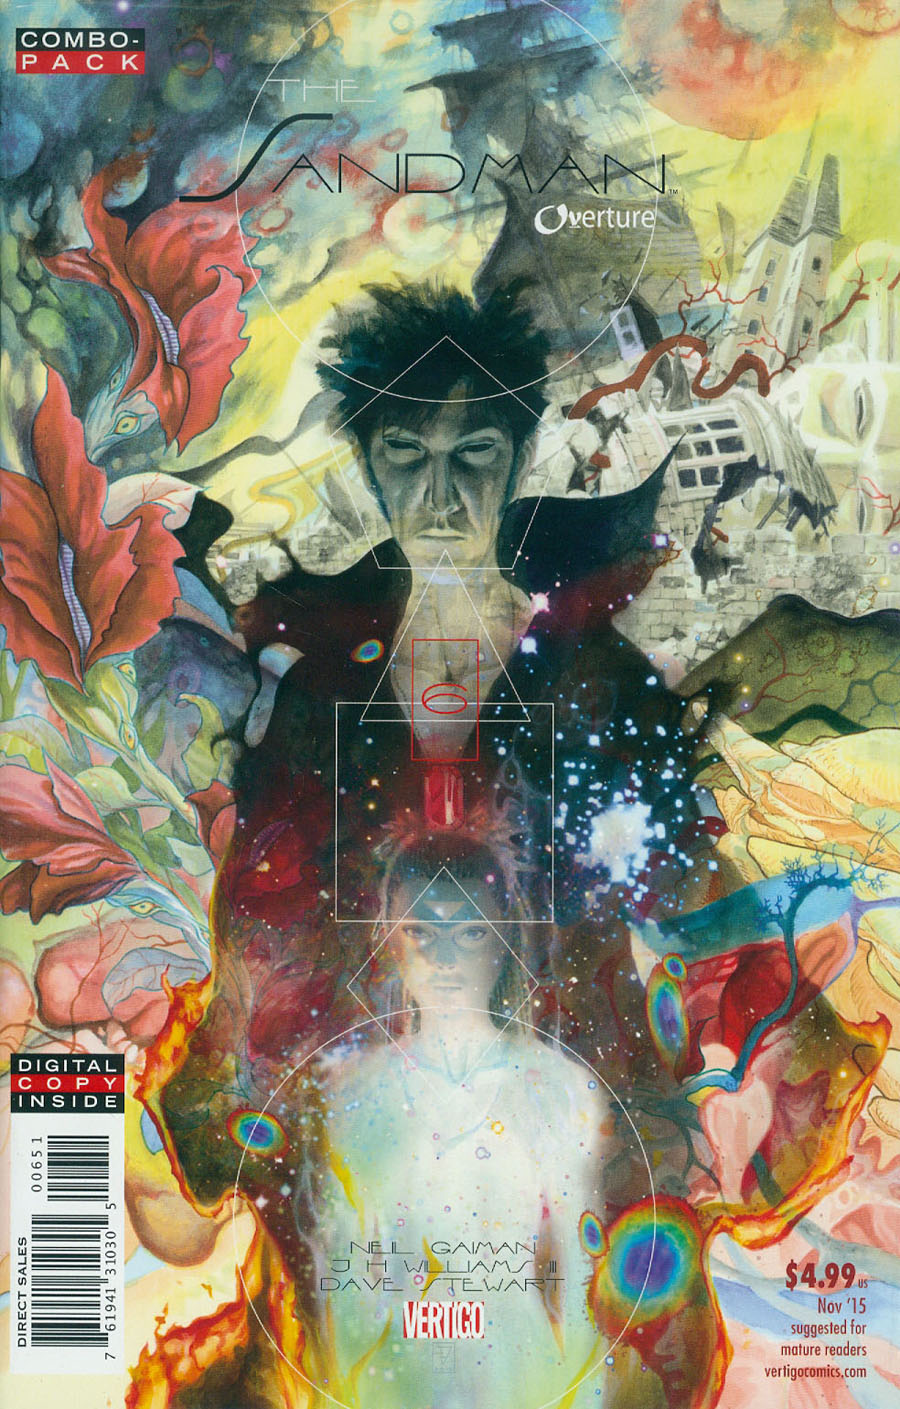 Sandman Overture #6 Cover D Combo Pack Without Polybag